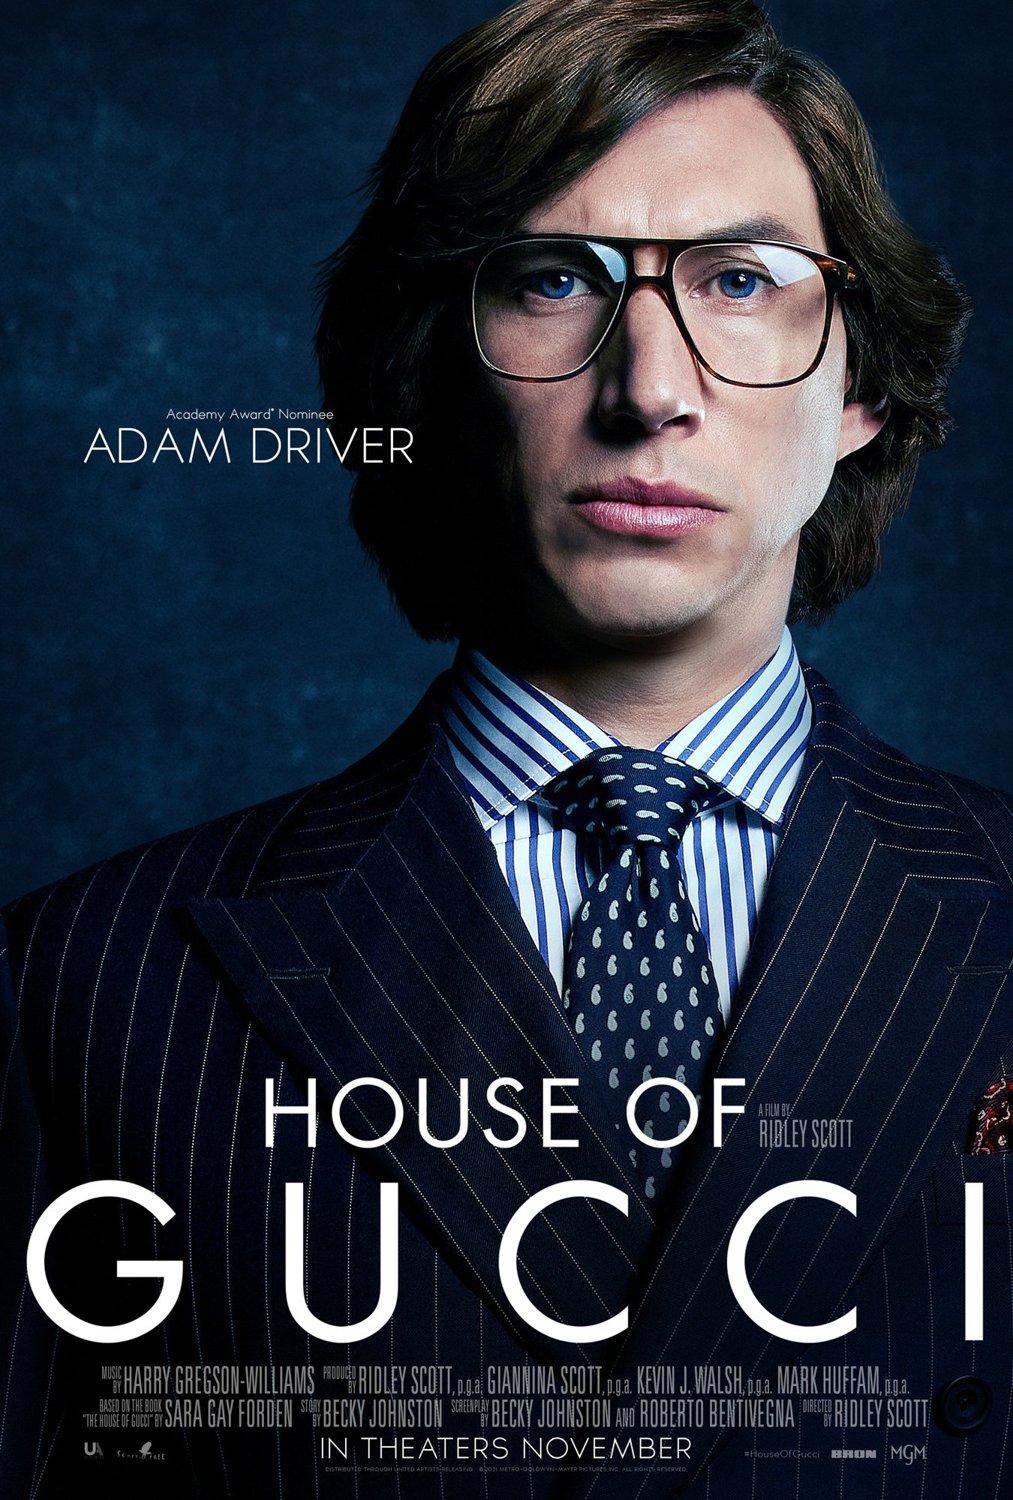 House of Gucci (2021) Pictures, Photo, Image and Movie Stills